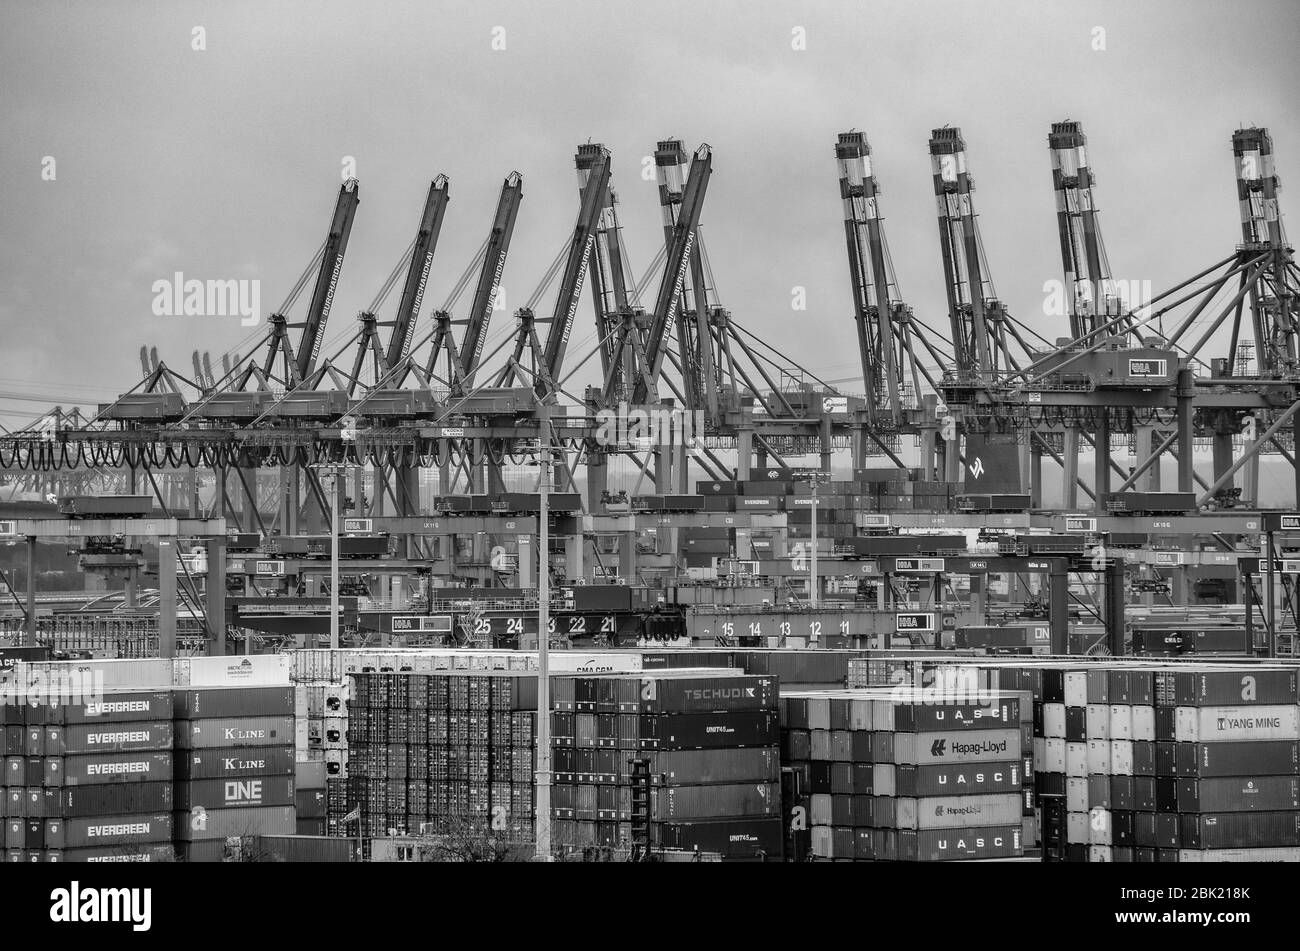 Hamburg container port with some ships loading and cranes transporting container to the freighters  with a dramatic sky/clouds, Germany Stock Photo